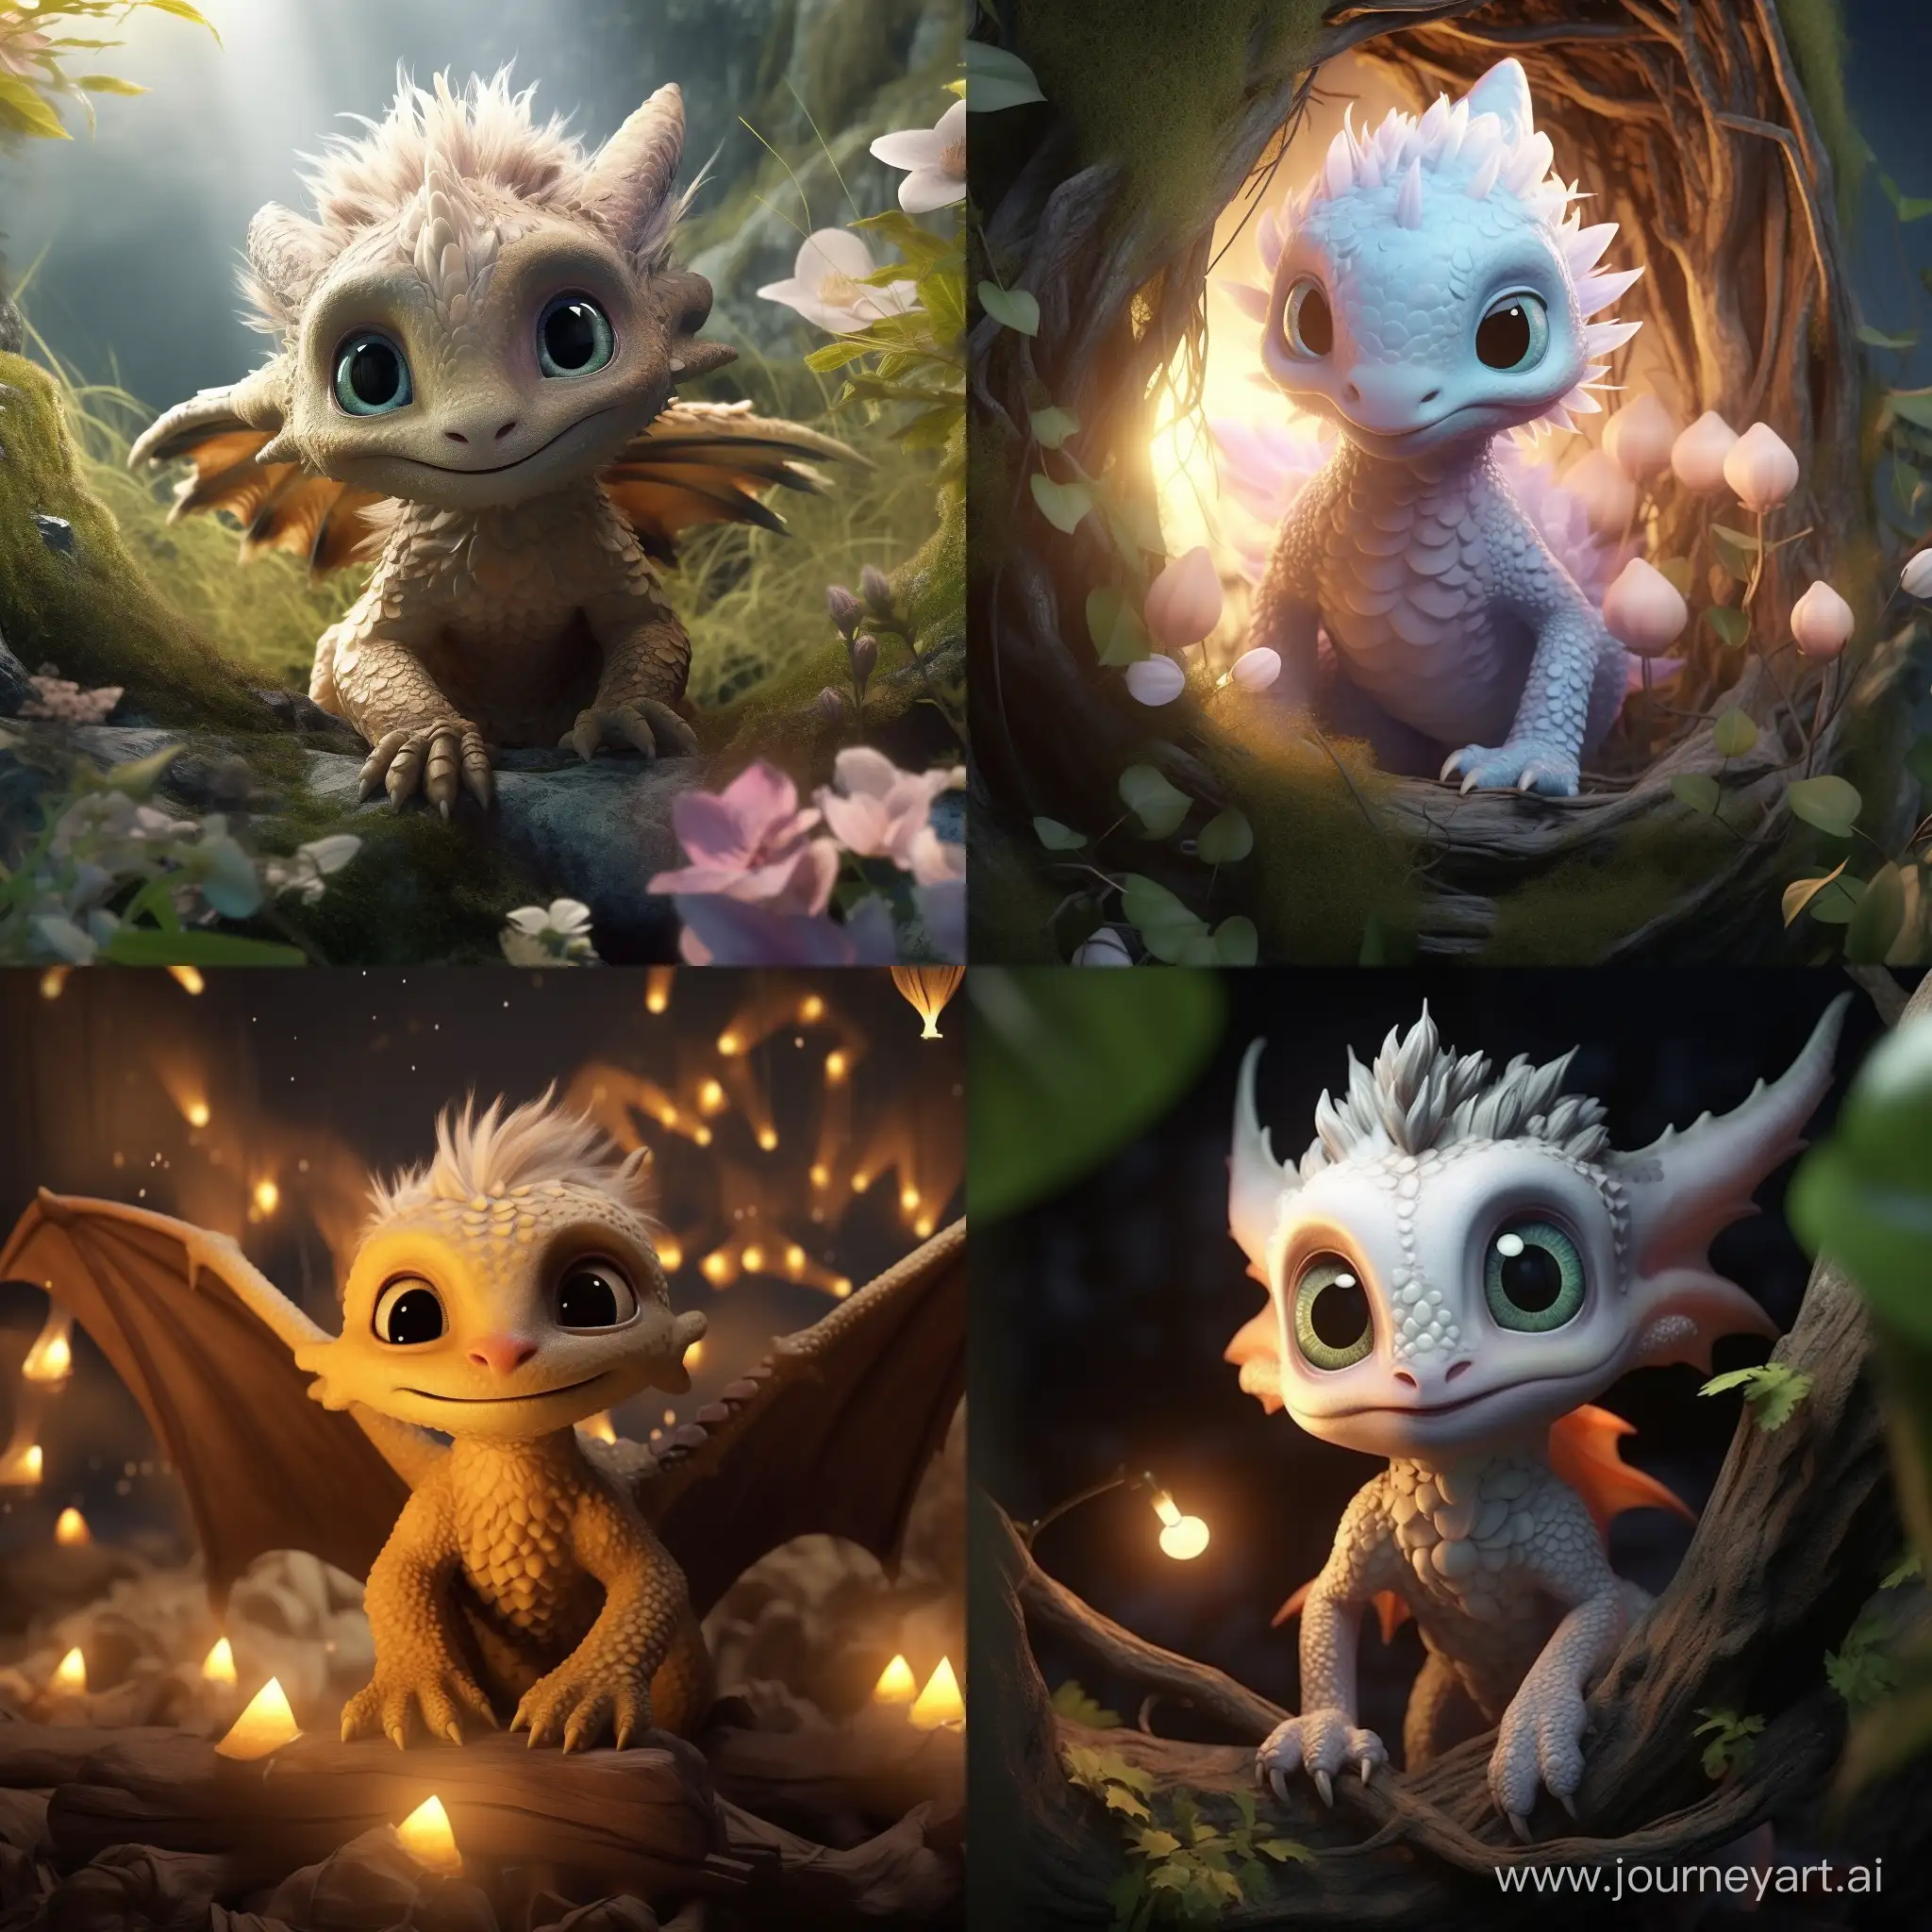 realistic cute adorable baby dragon 30ft tall, epic composition, magical scene
